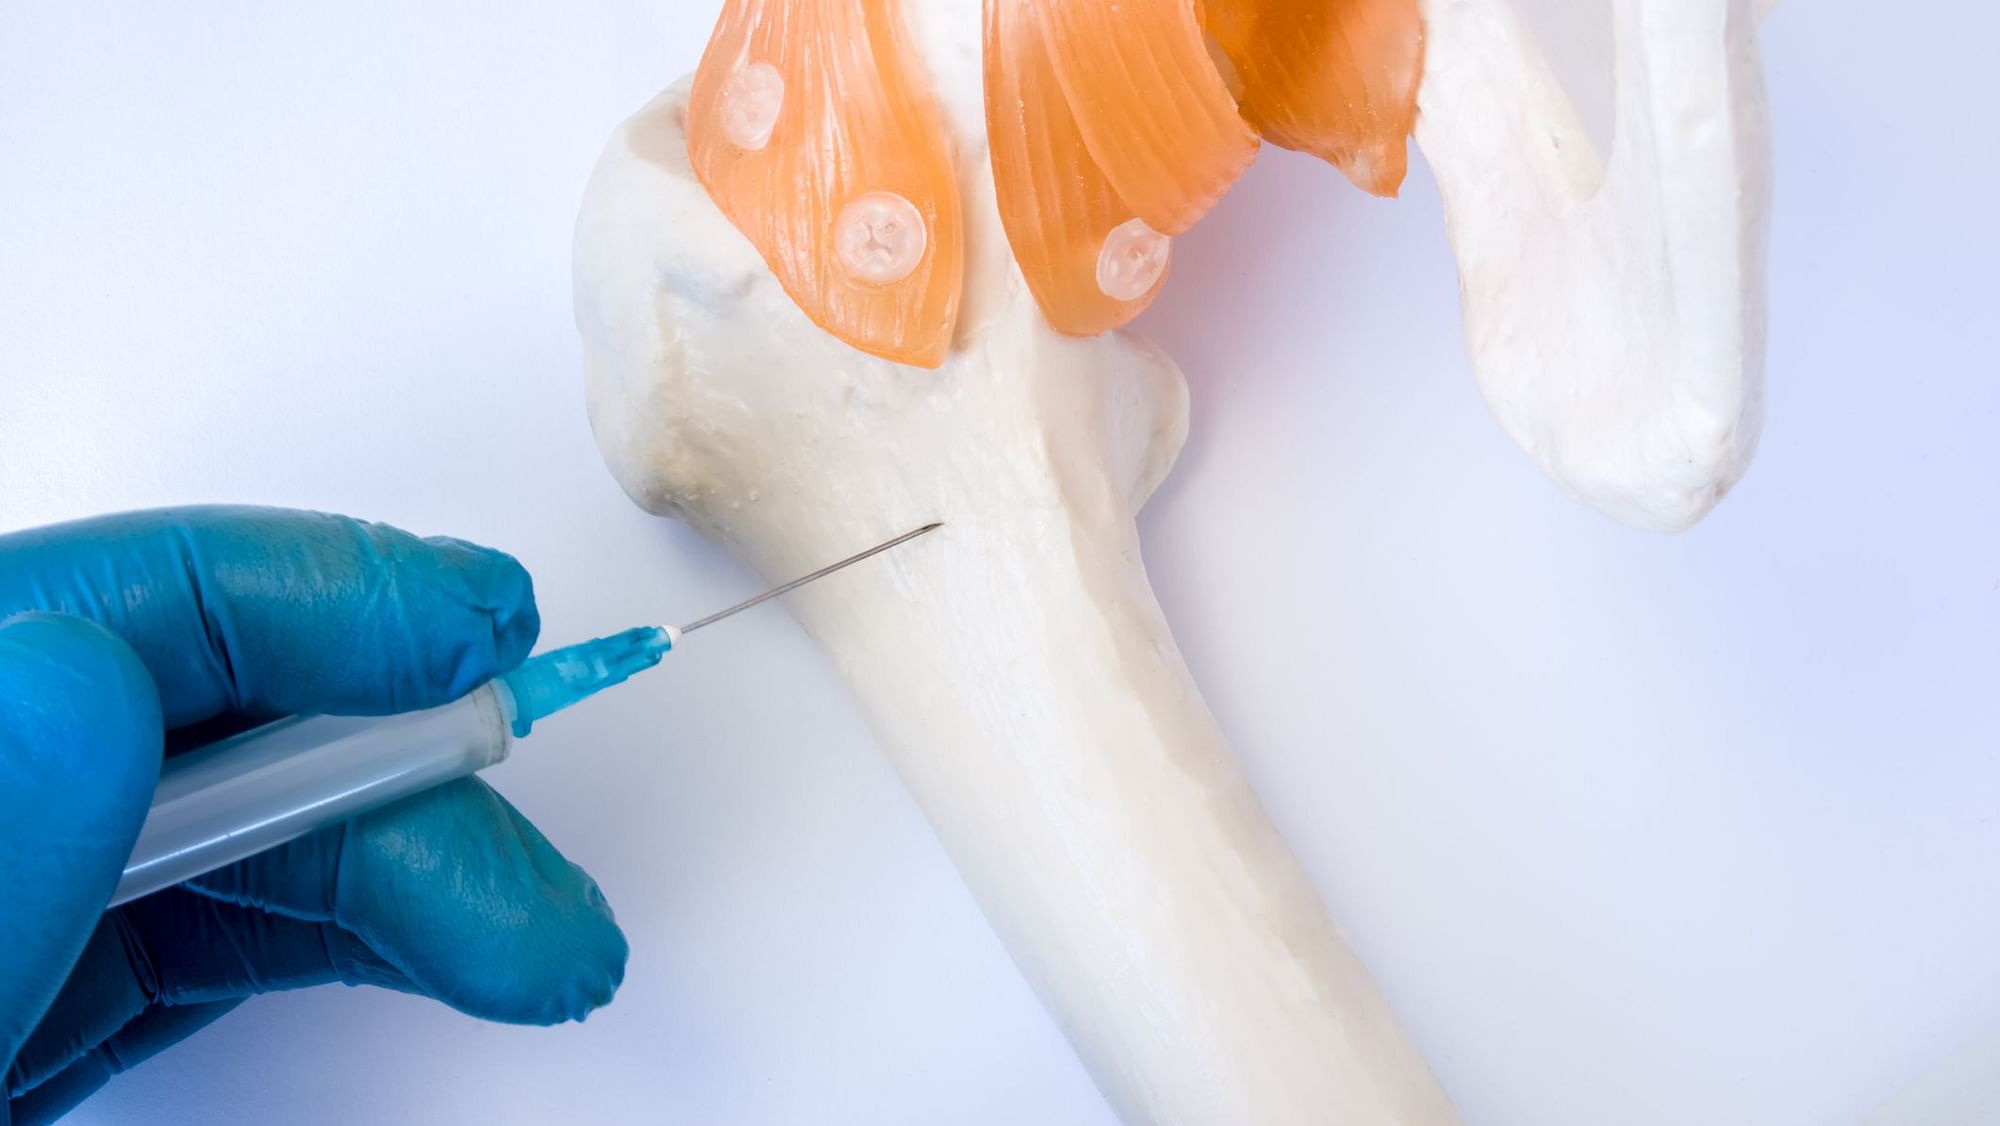 Bone marrow harvesting involves a procedure during which stem cells are collected with a needle placed into the soft centre of the bone.